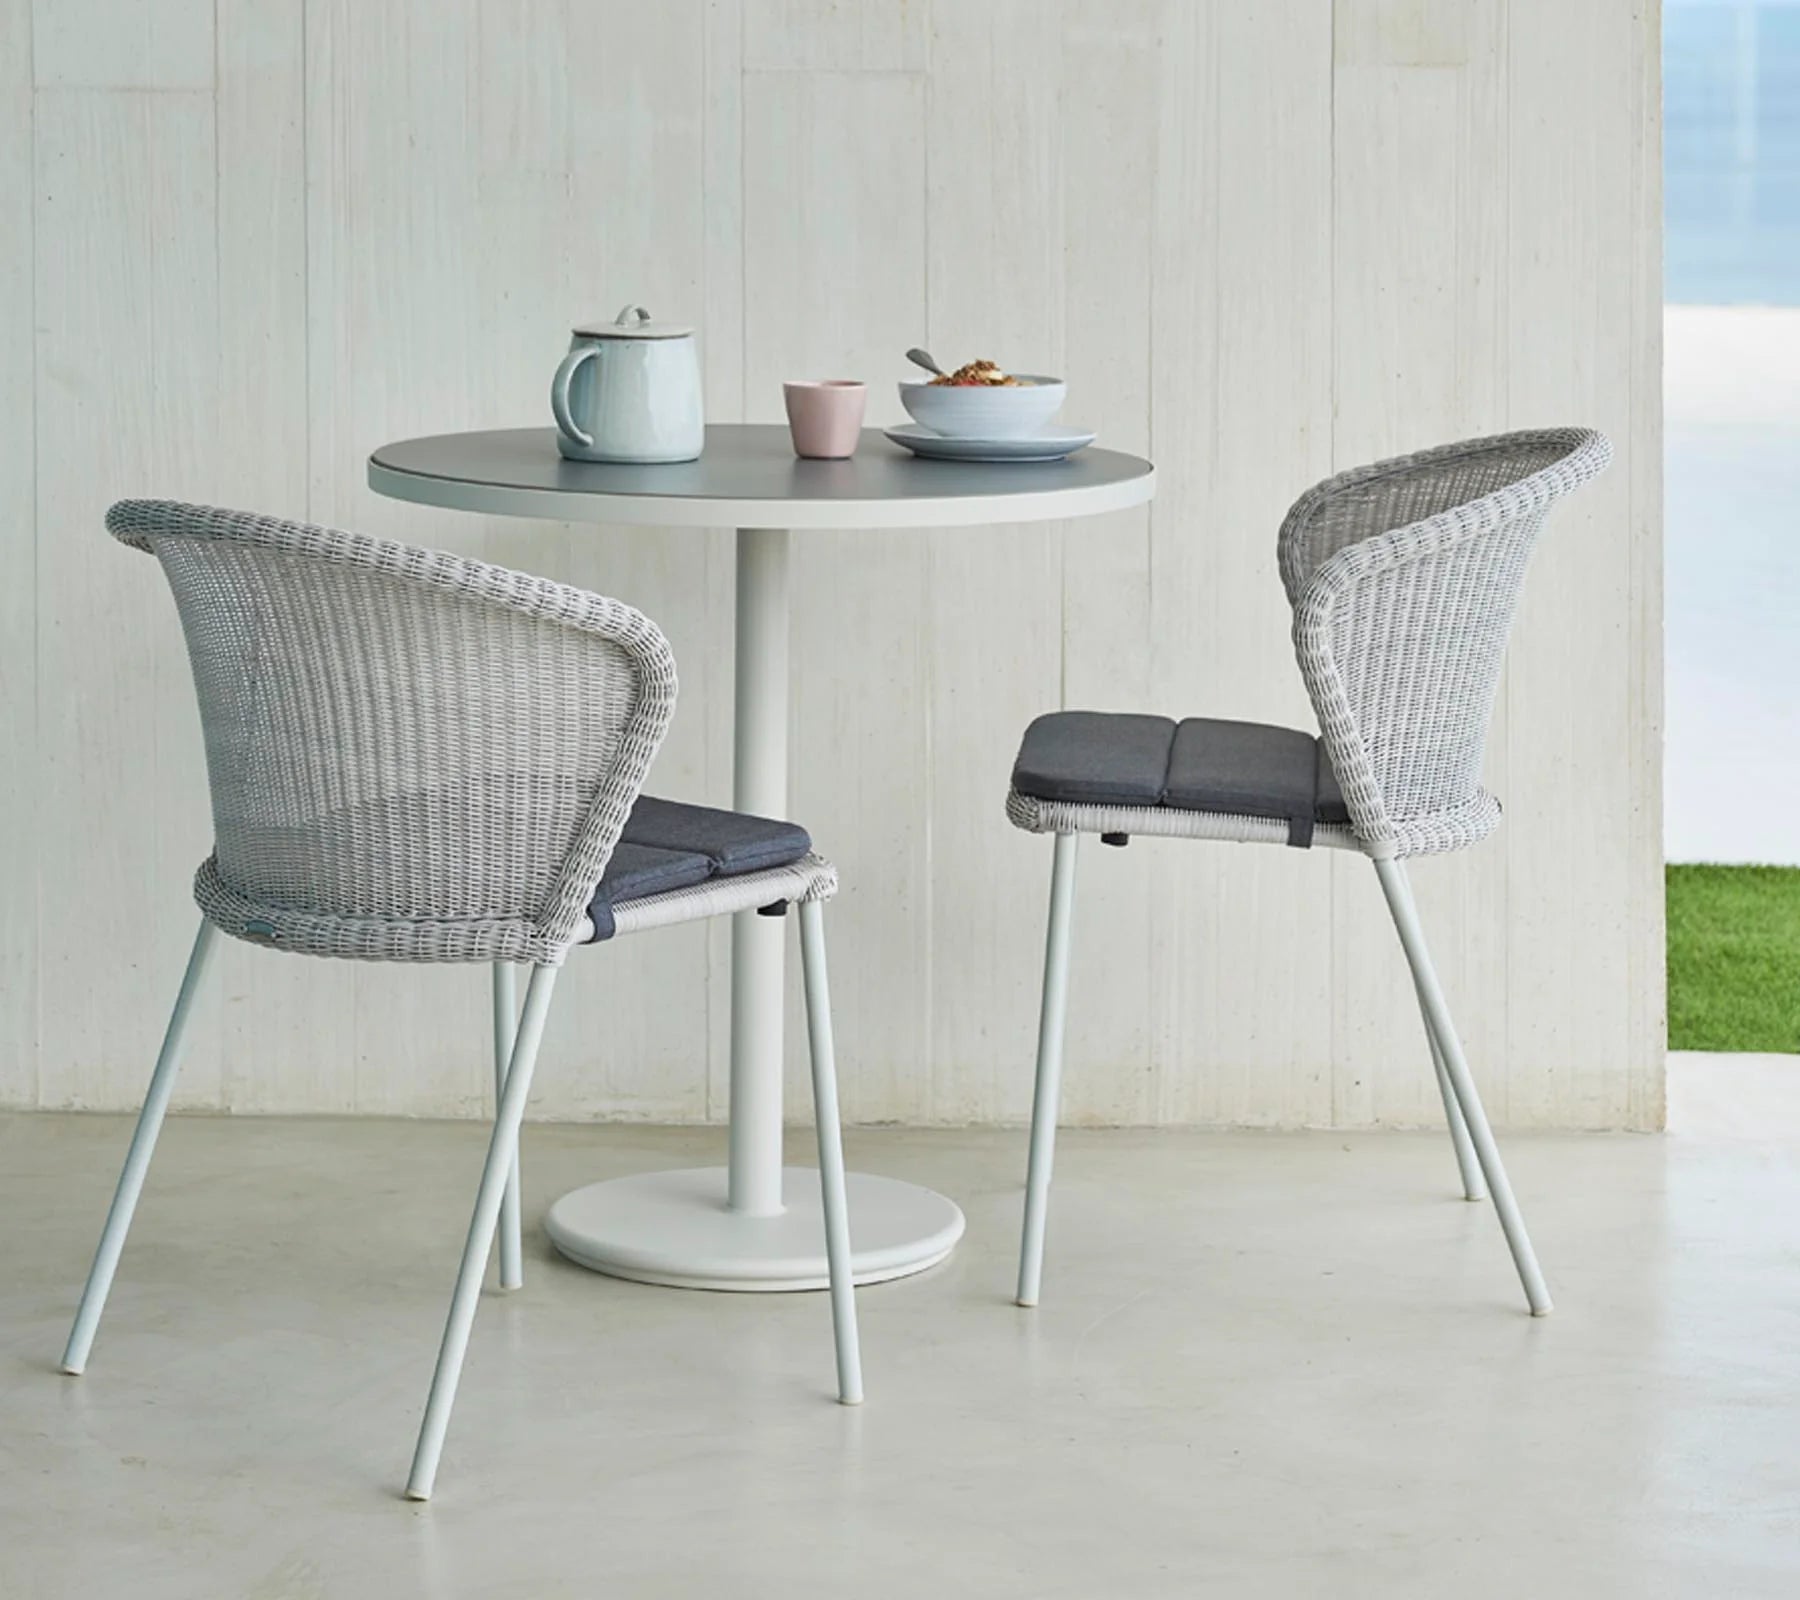 Boxhill's Lean Stackable Outdoor Garden Chair White Grey Weave lifestyle image with Round Table and a pot, cup and bowl with food on top